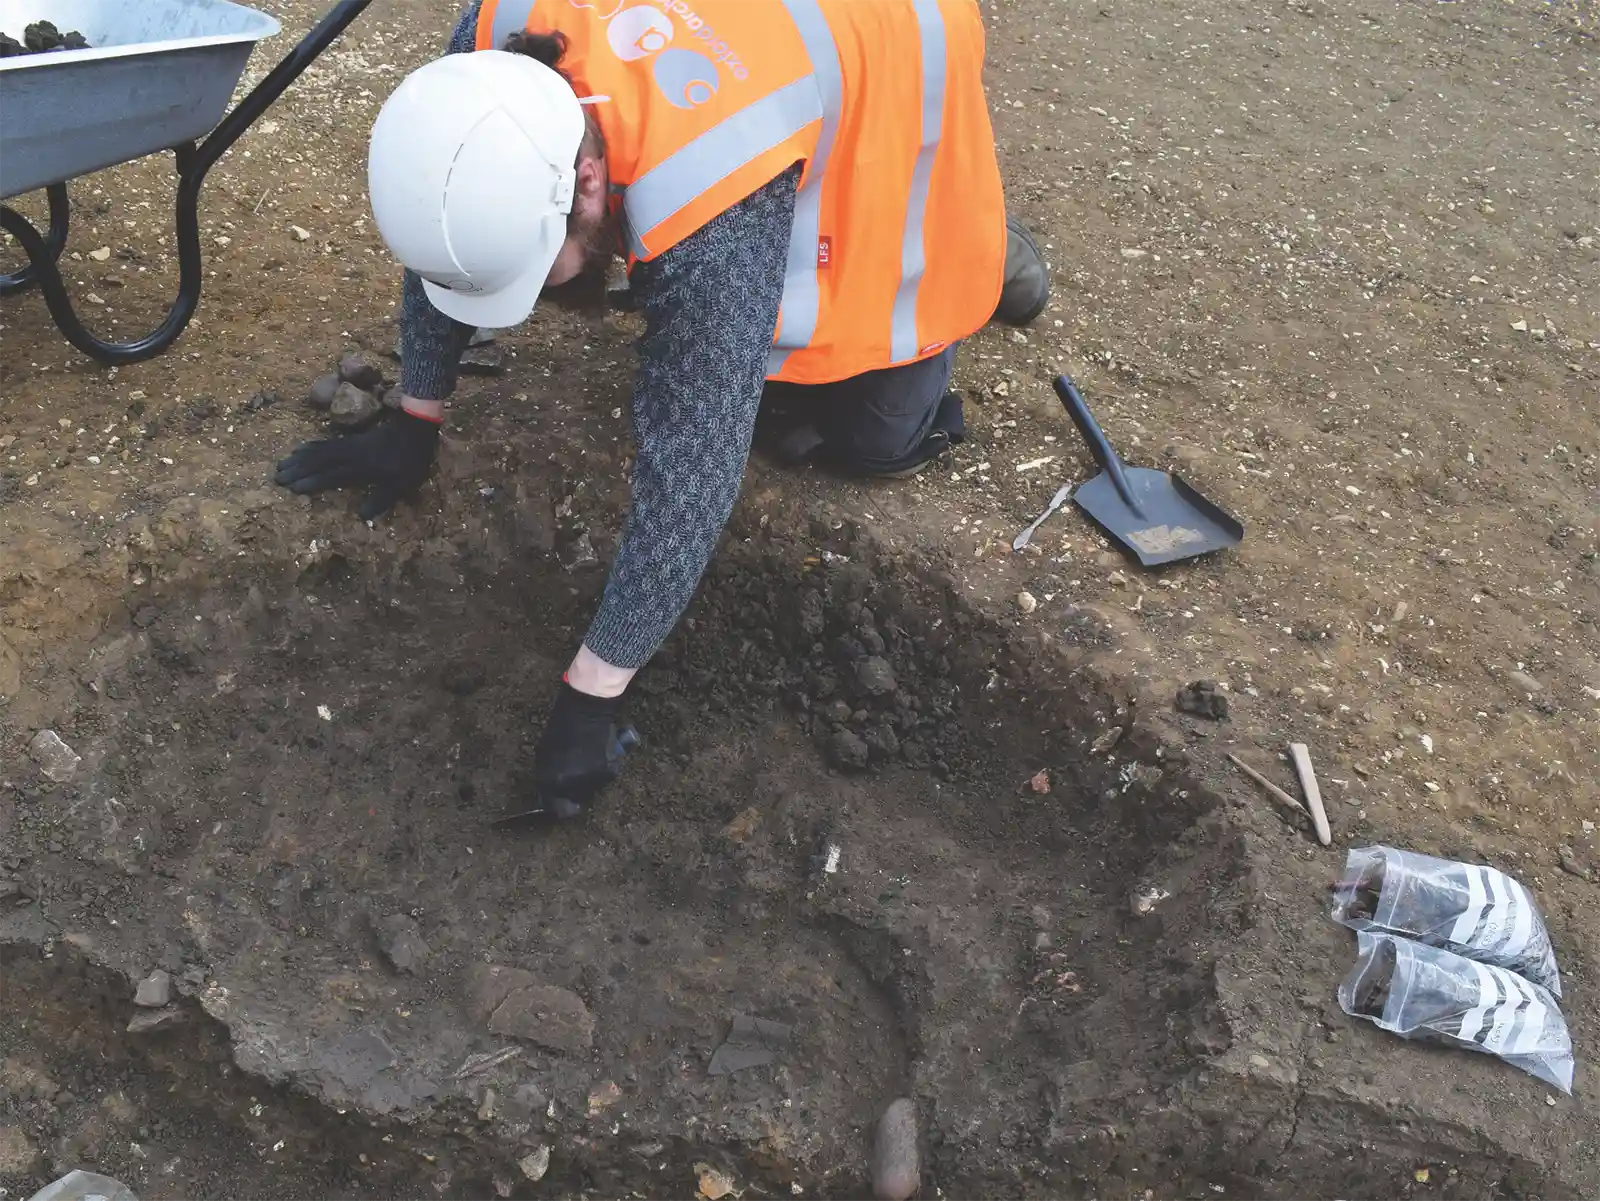 Archaeologist excavating a trench